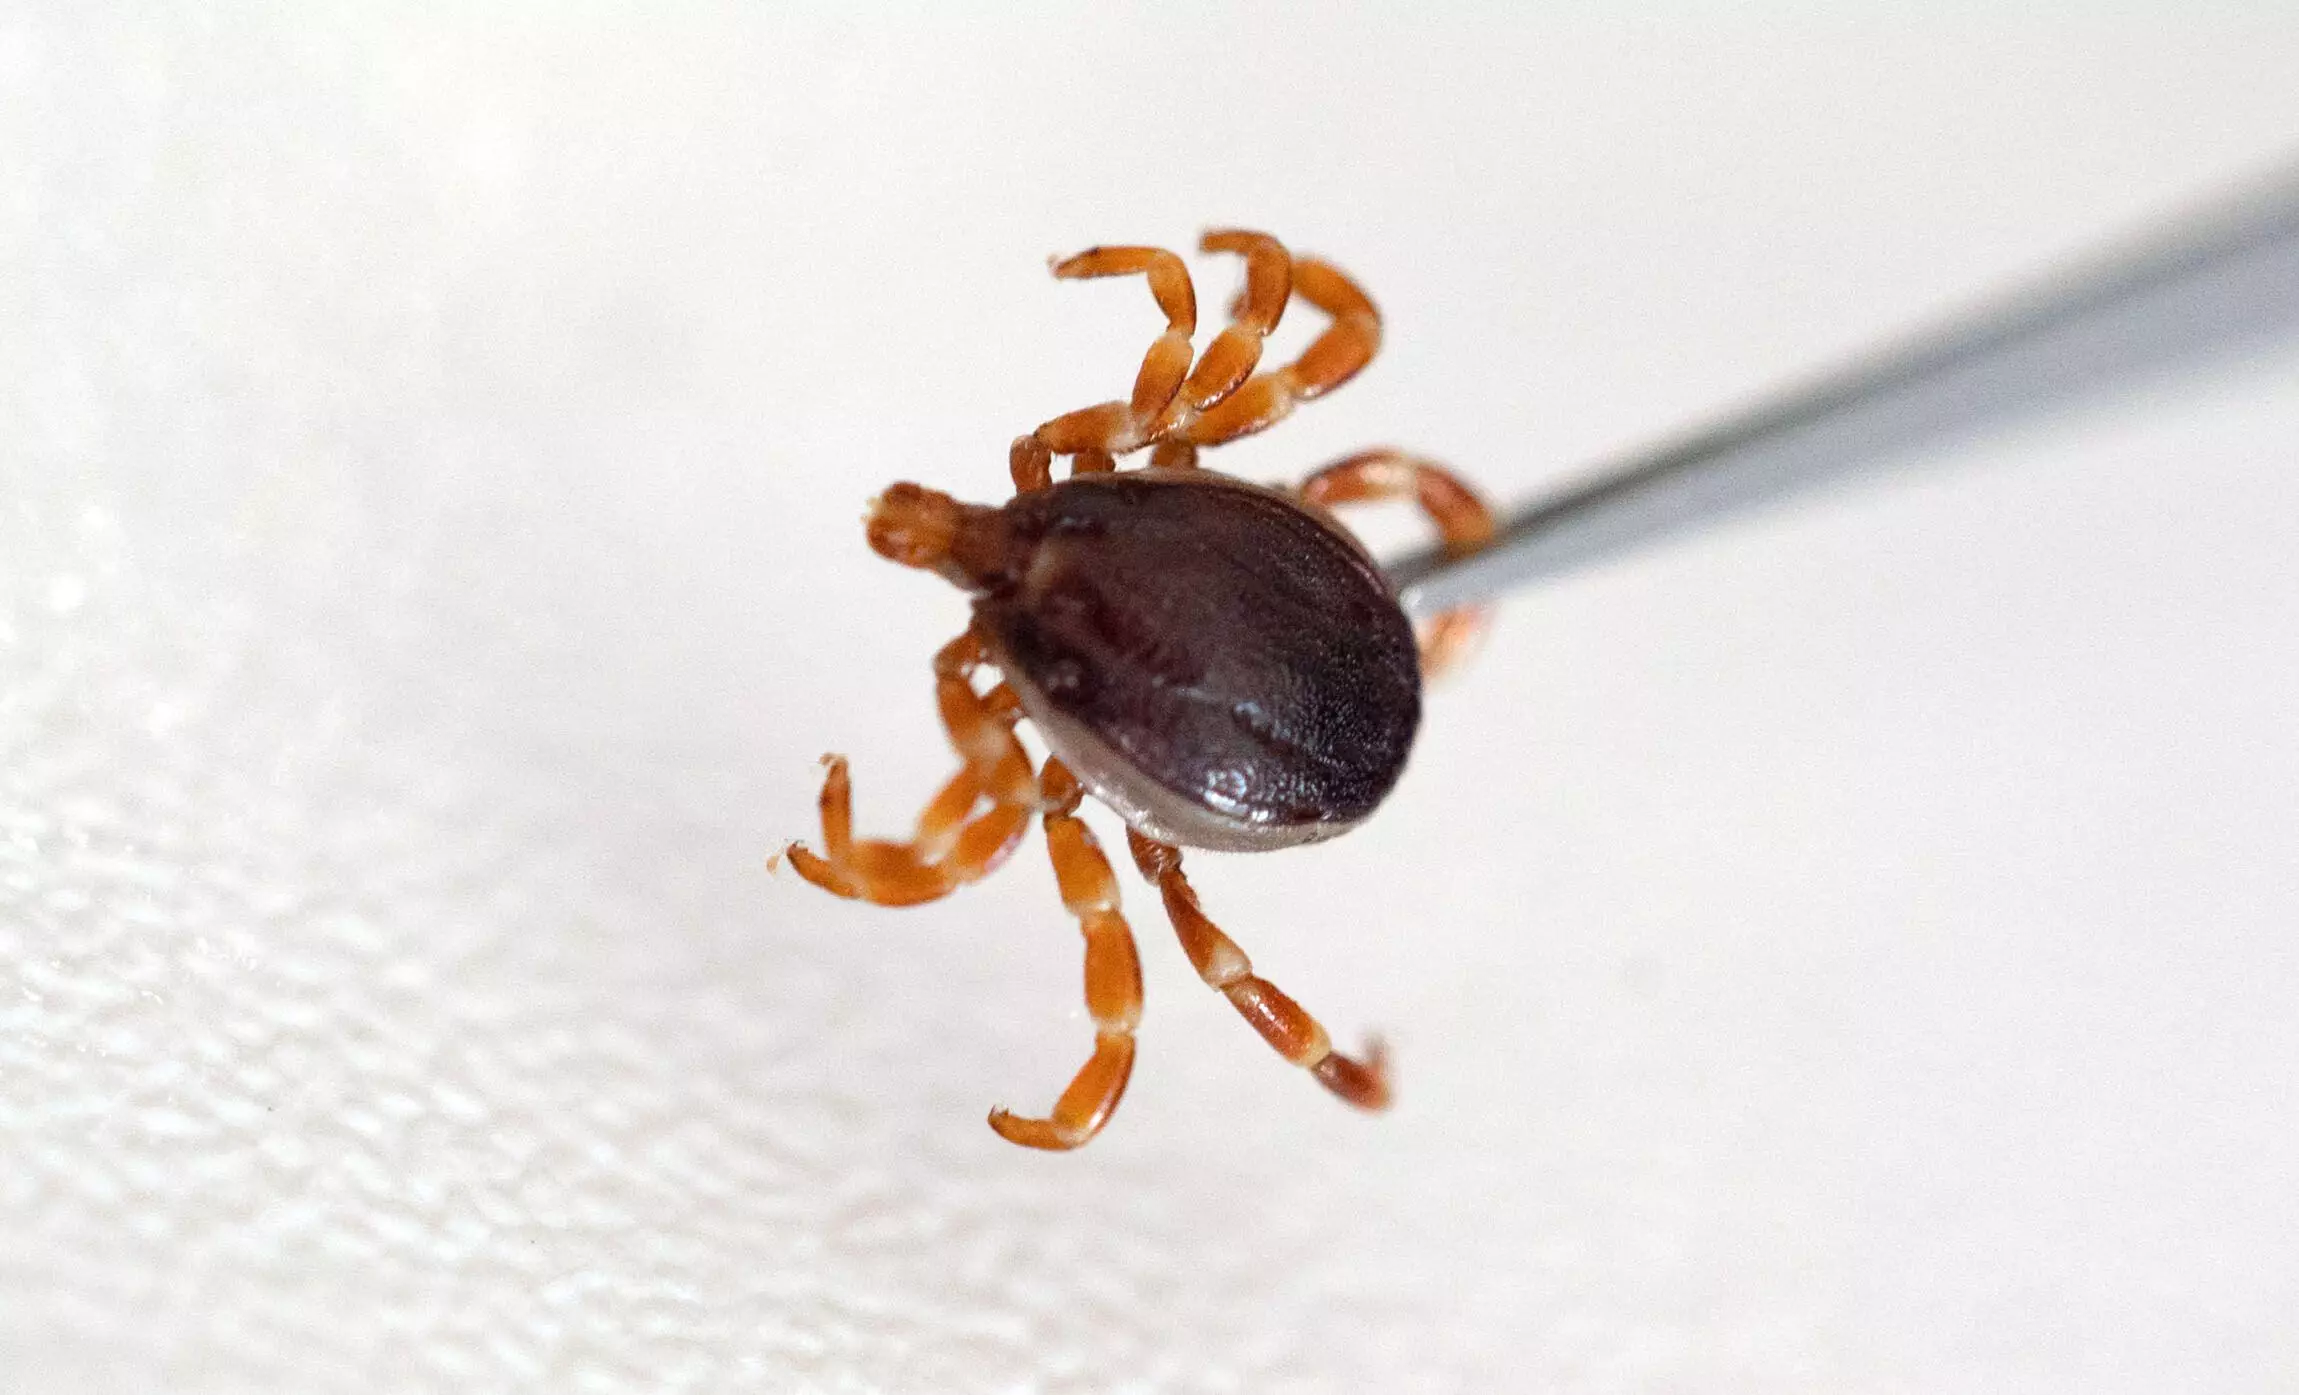 A hyalomma tick, one of the principle carriers of CCHF.